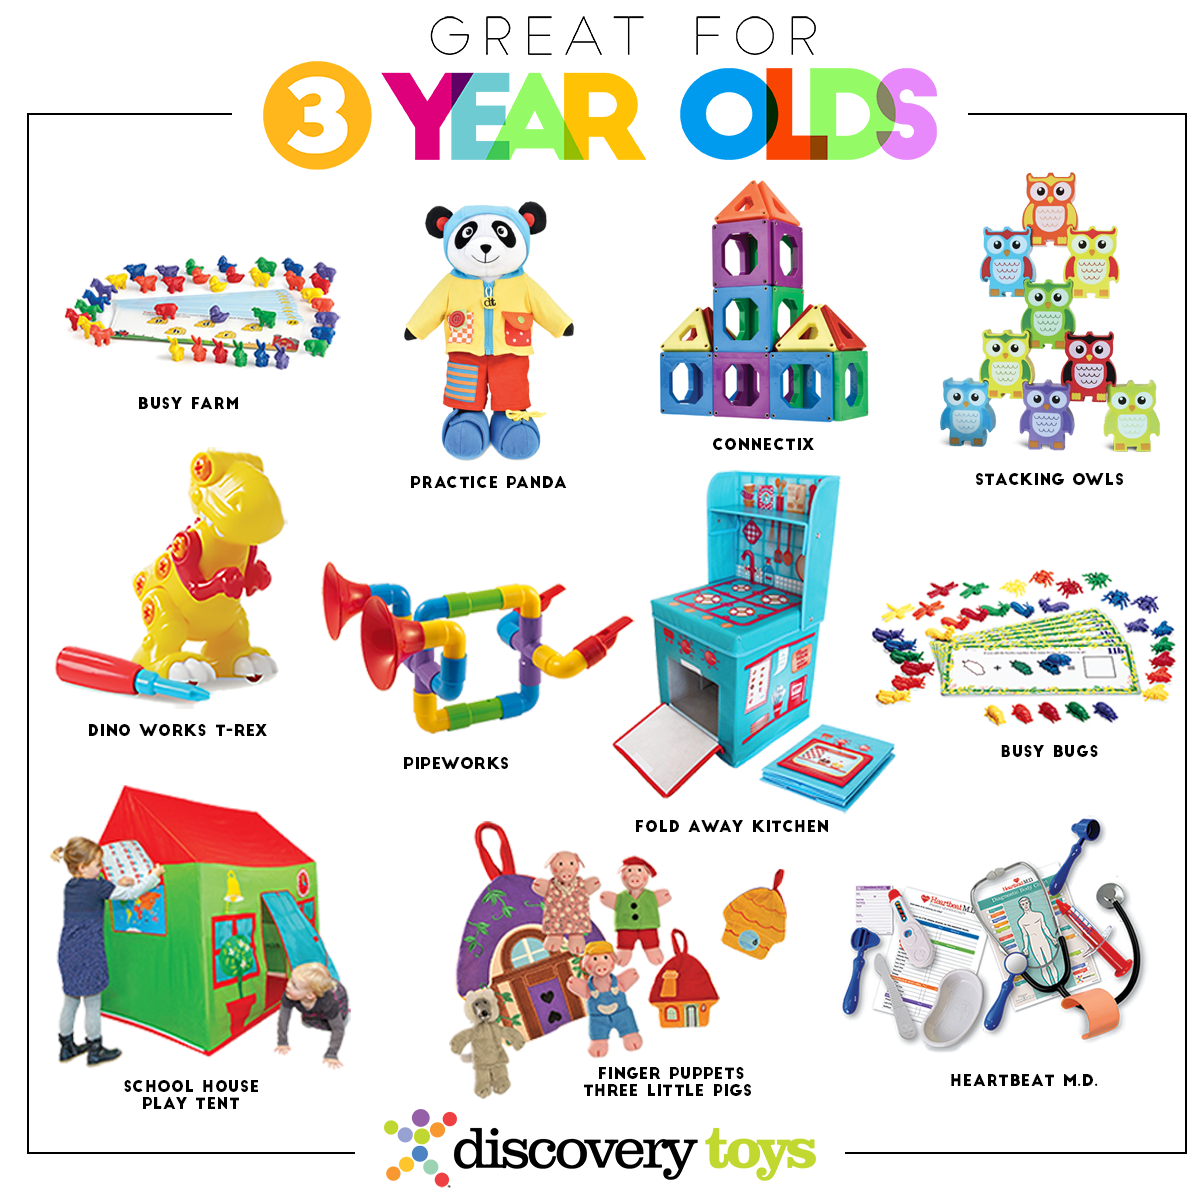 popular toys for 3 year olds 2018